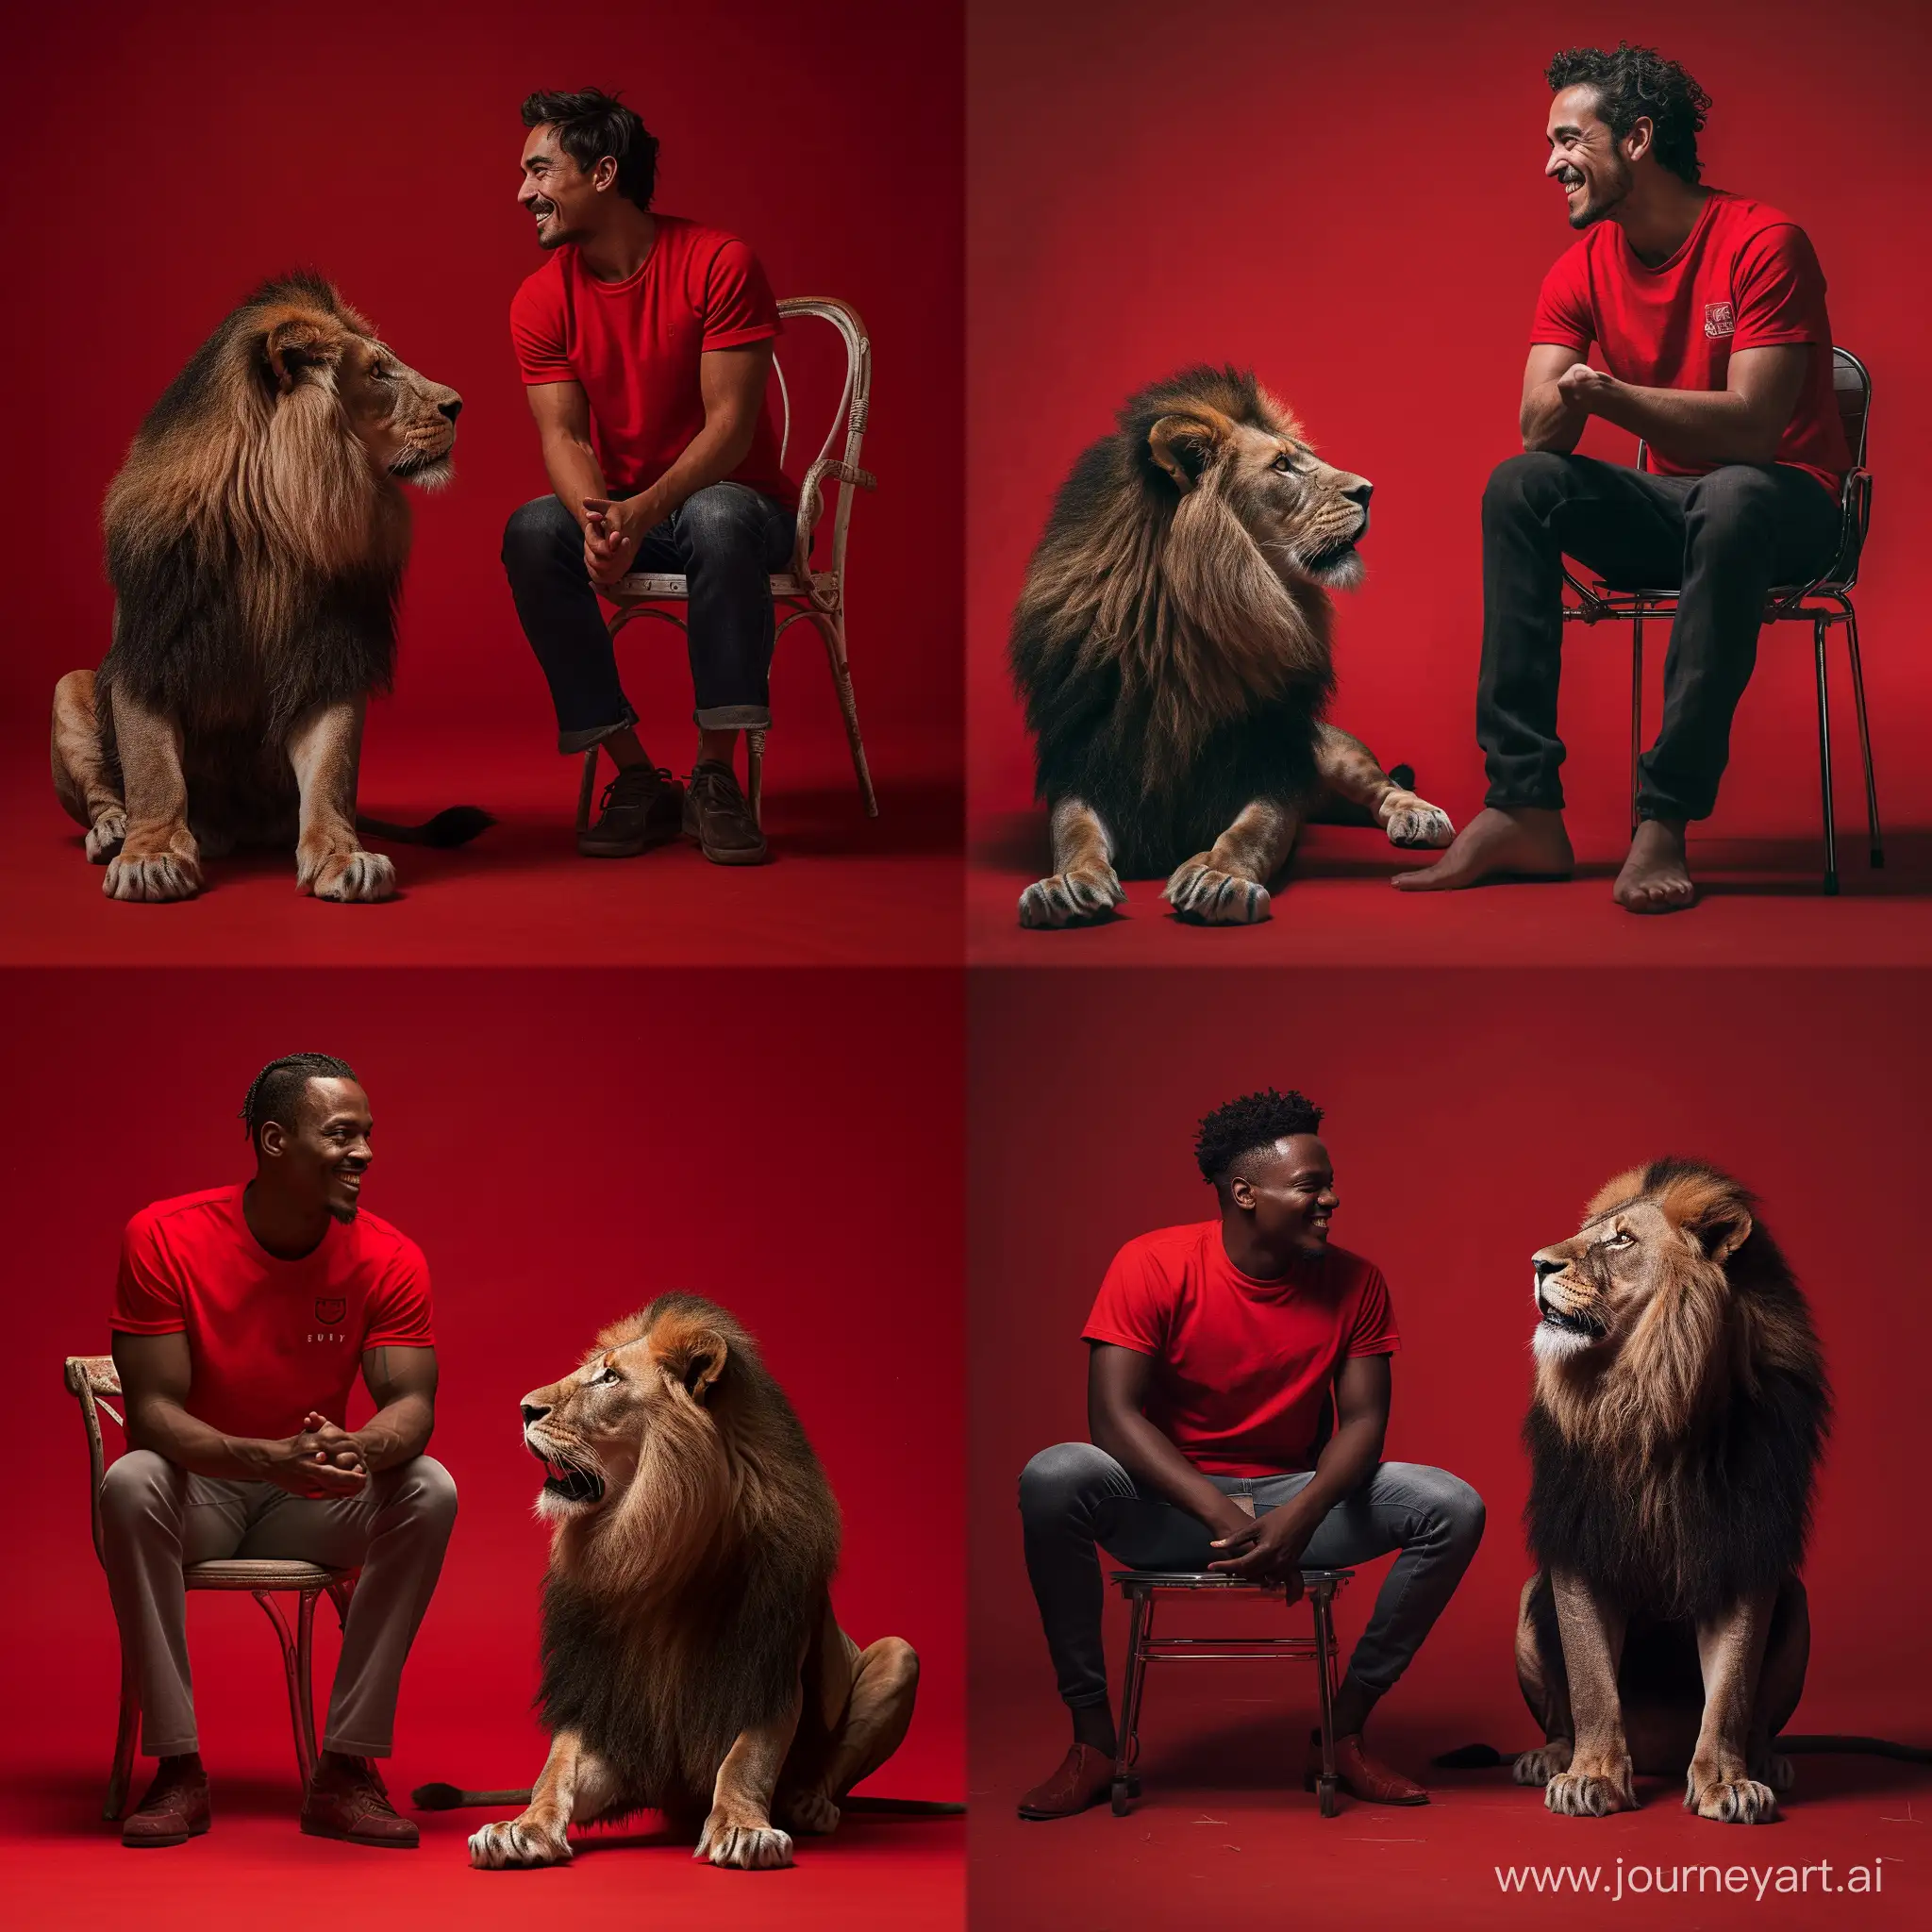 Joyful-Encounter-Smiling-Man-and-Lion-in-Studio-with-Red-Background